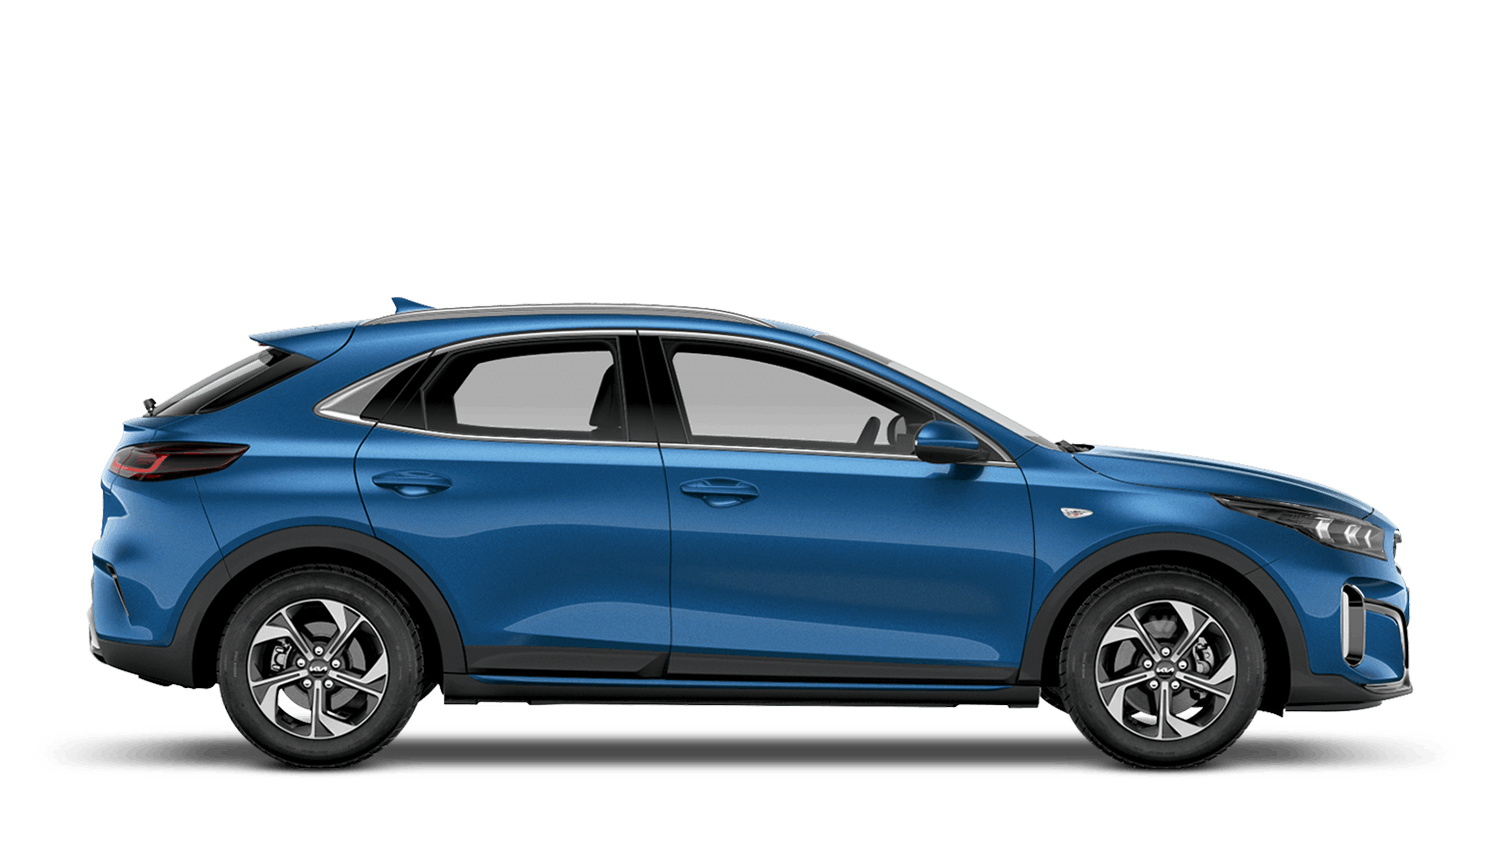 The new Kia XCeed A Sporty Compact Crossover